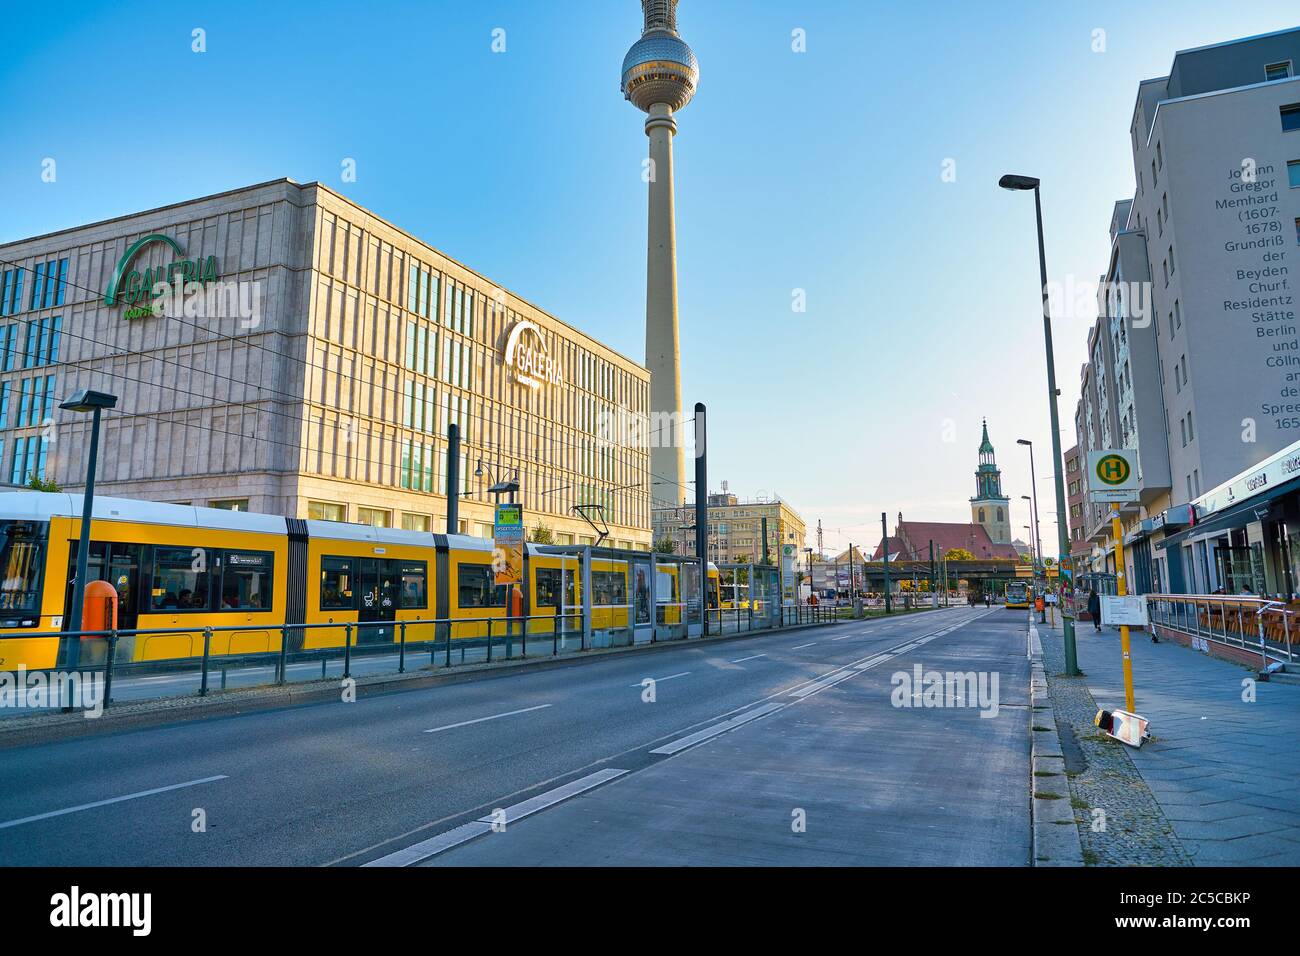 BERLIN, GERMANY - CIRCA SEPTEMBER, 2019: Bombardier Flexity Berlin seen in the daytime. It is a tram type constructed for the Berlin tramway network. Stock Photo